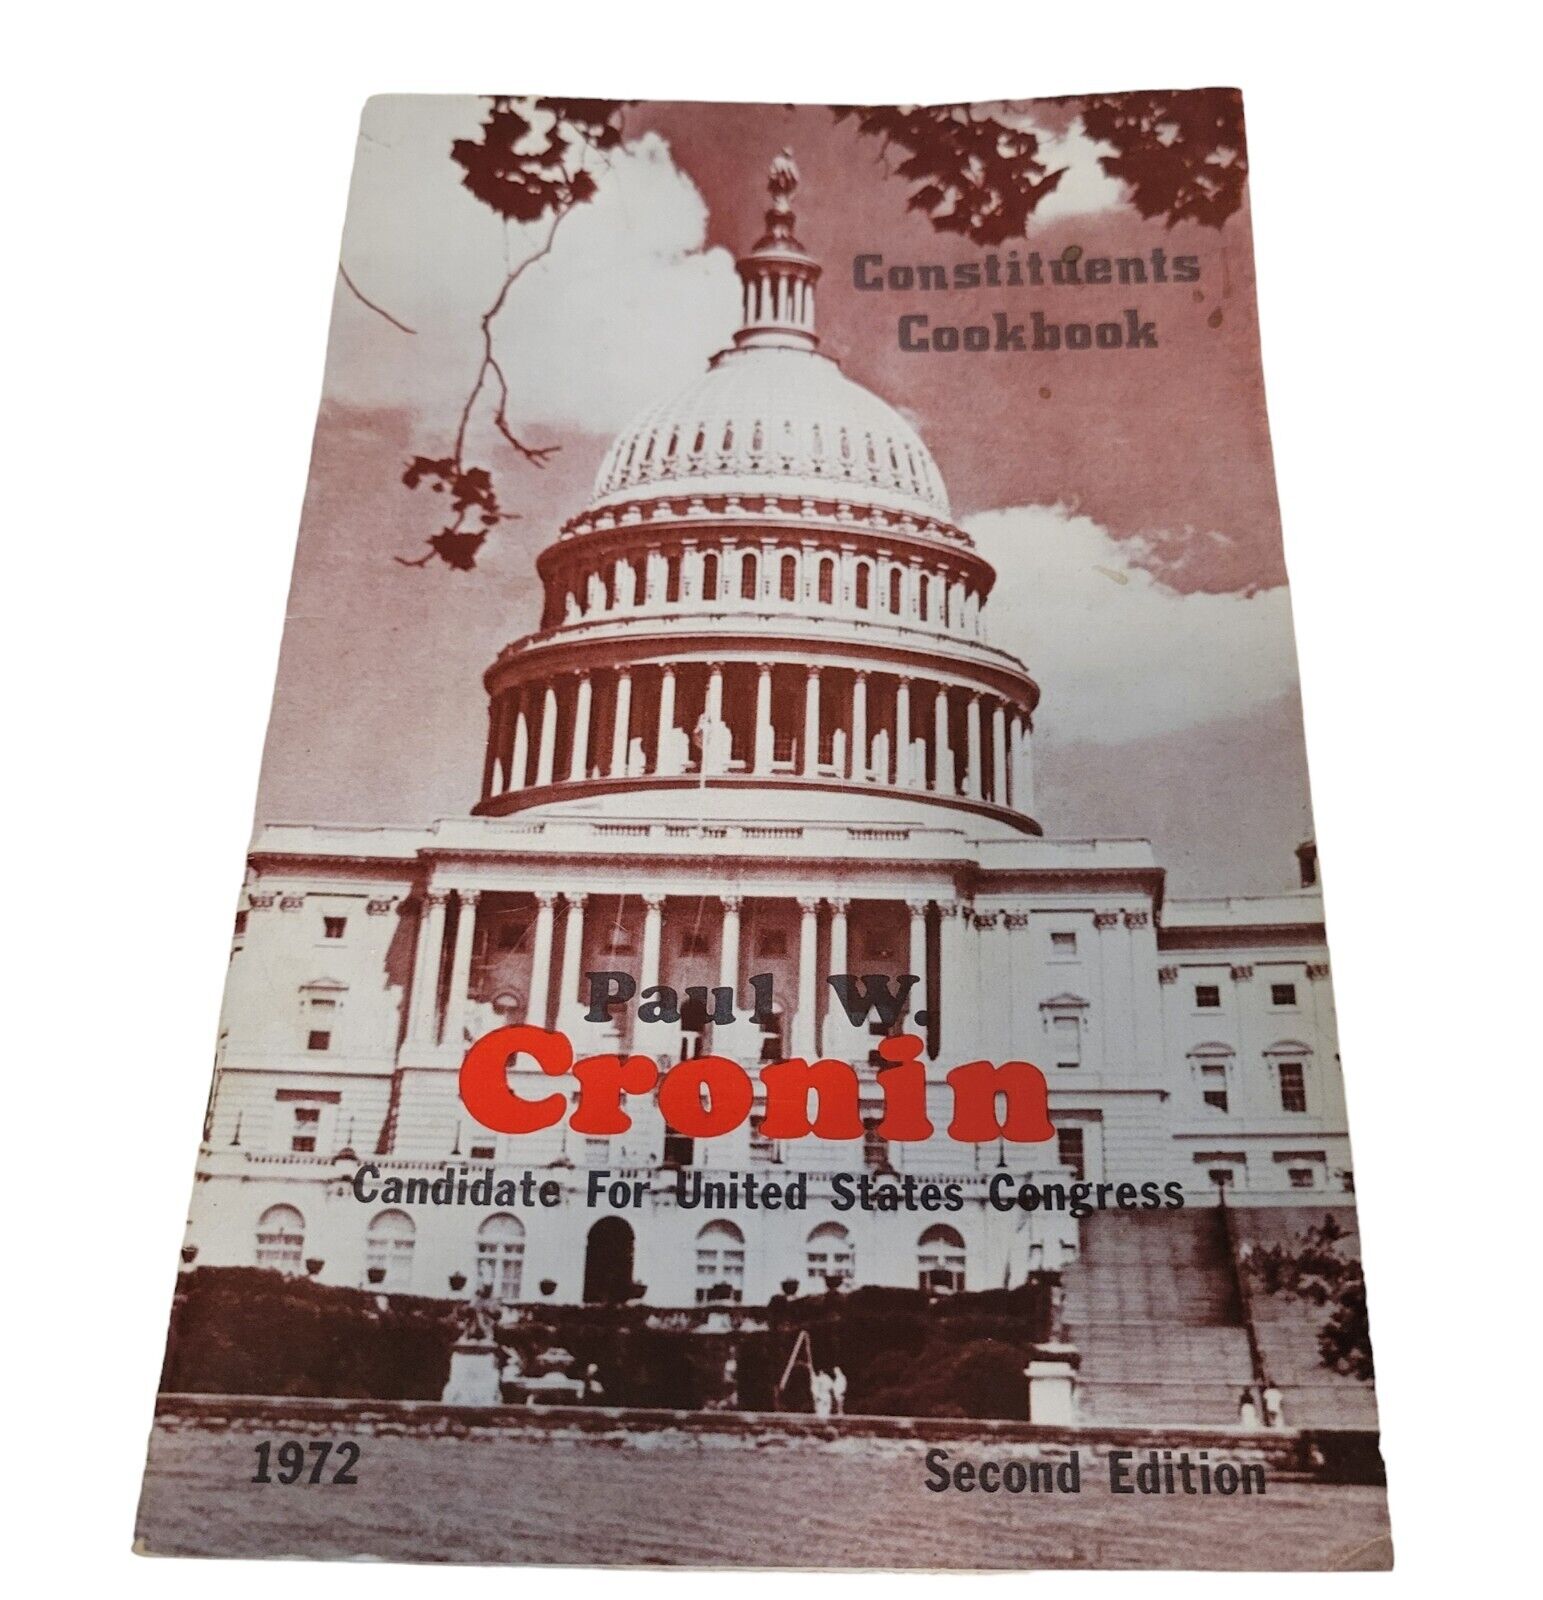 Vtg 1972 Paul W Cronin Campaign Cookbook Candidate for Congress 70\'s Consituents